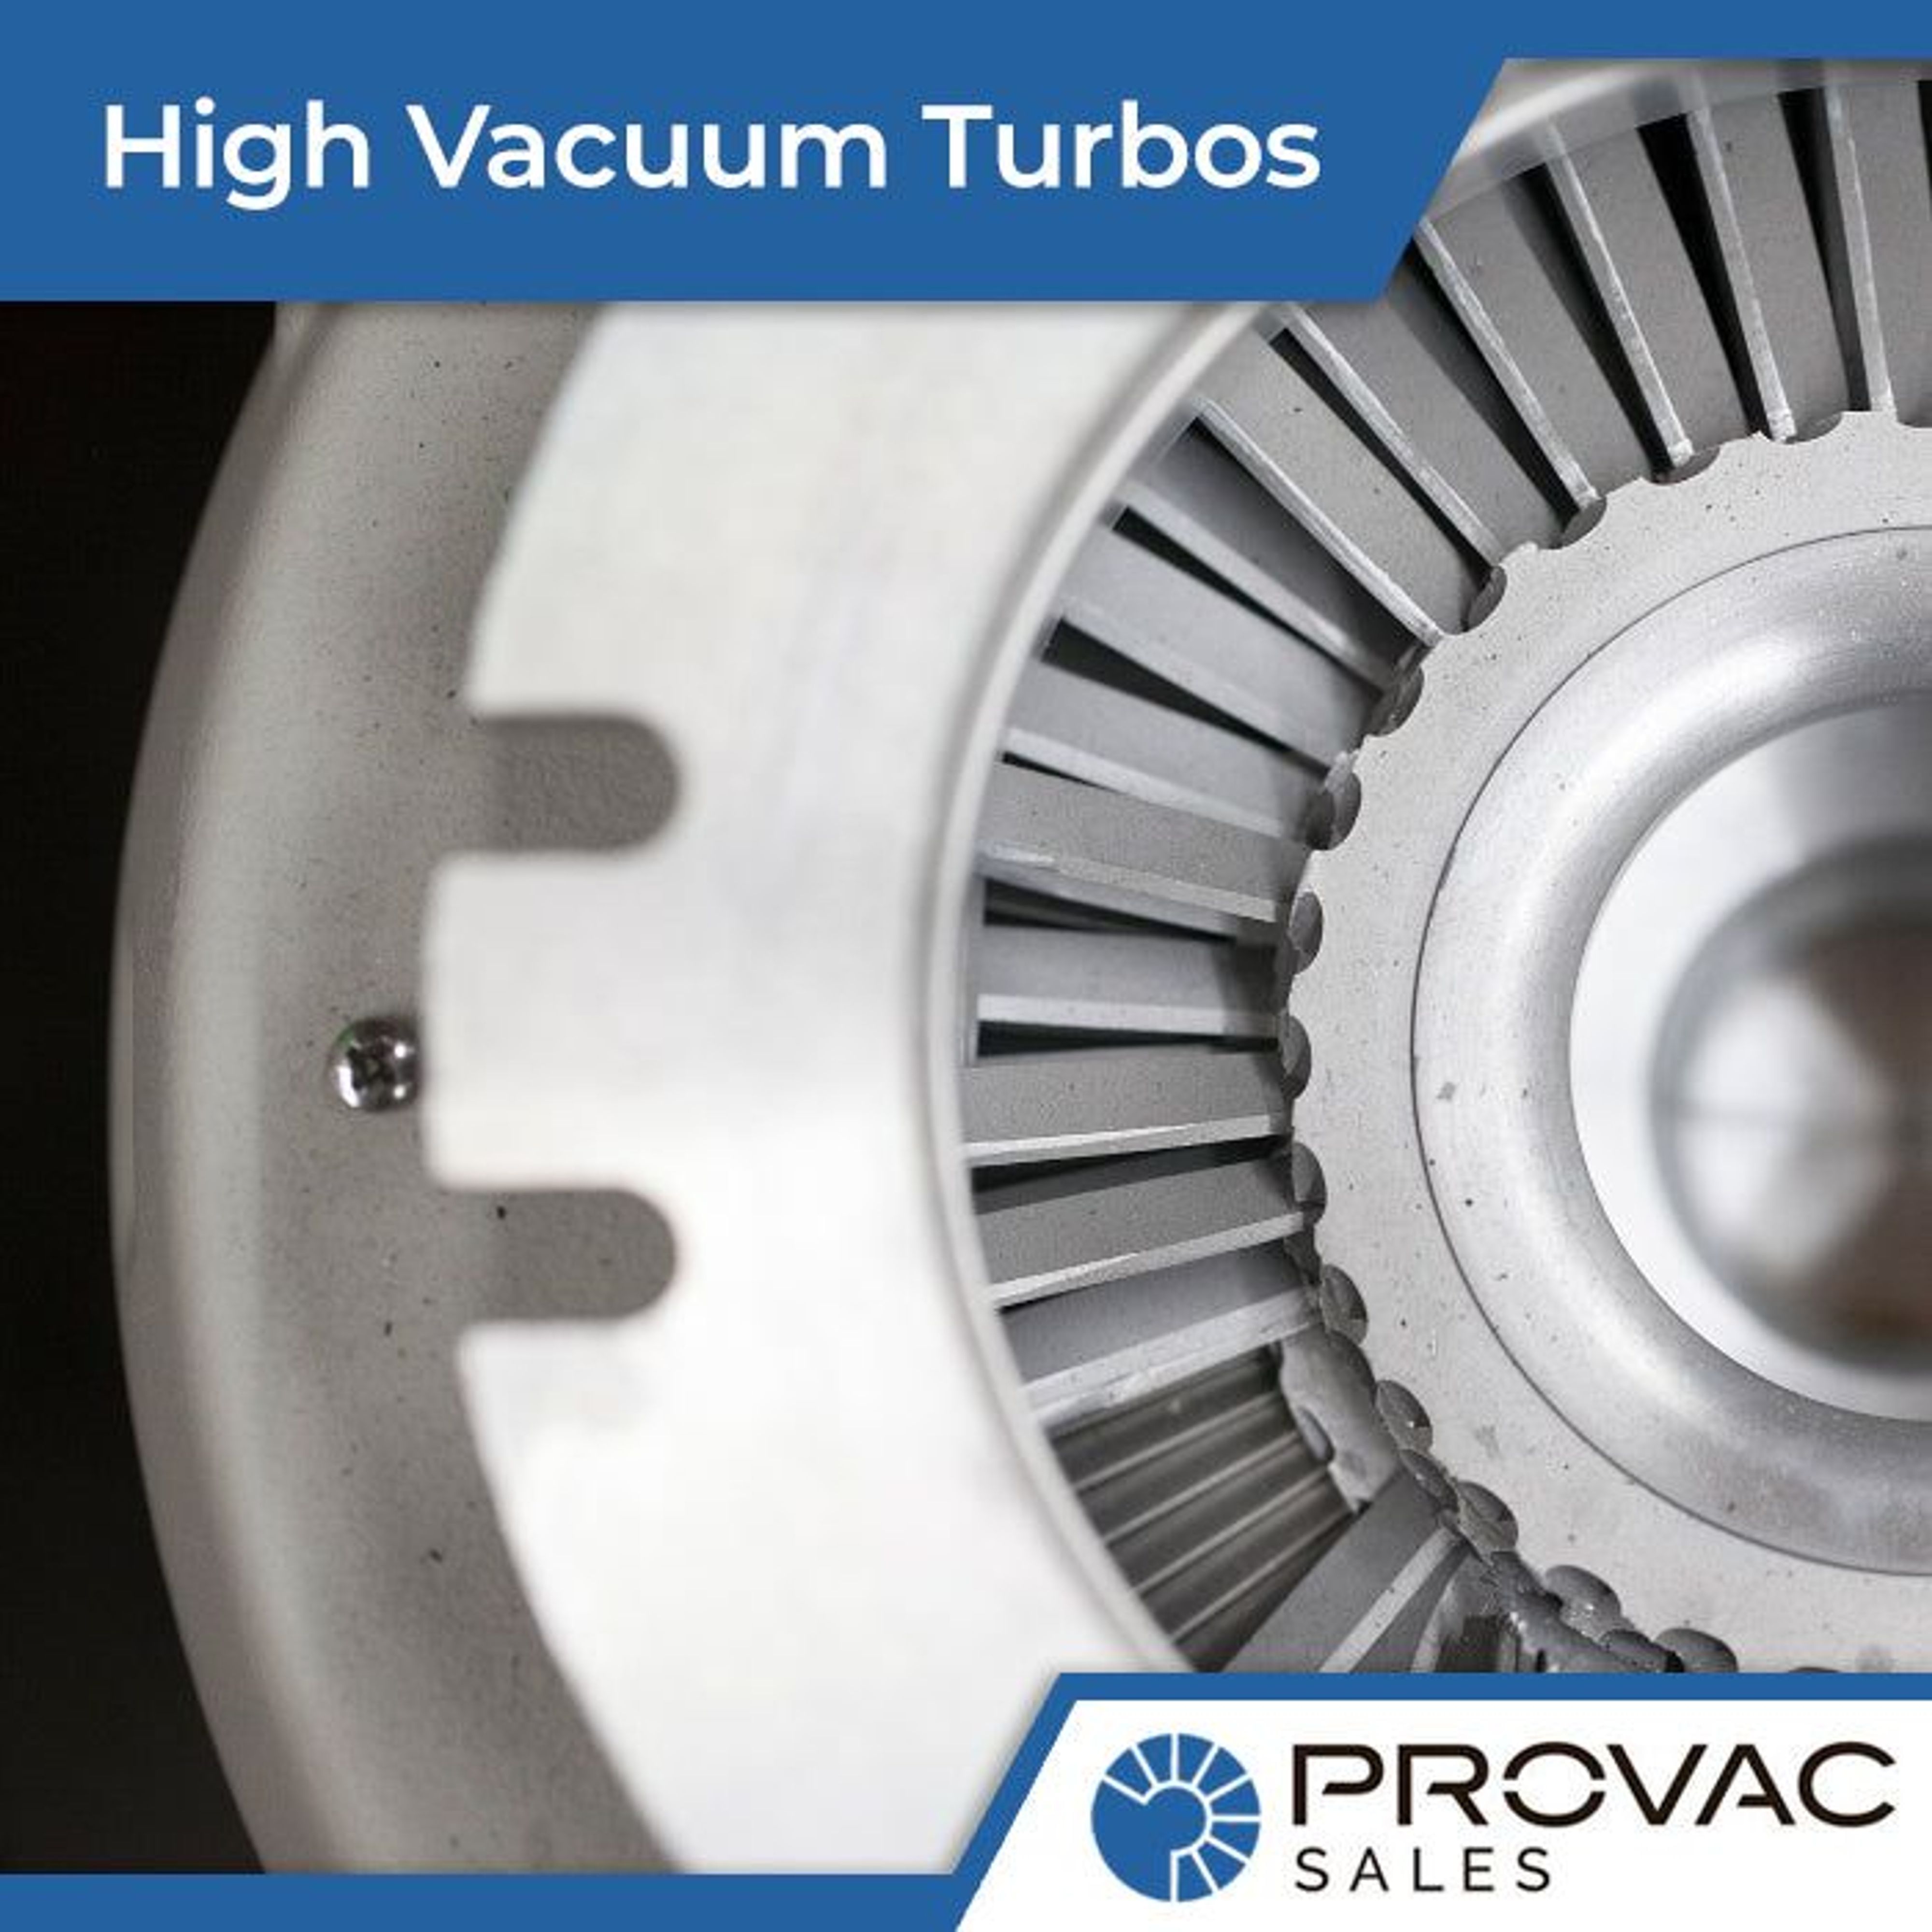 High Vacuum with Turbo Pumps Background